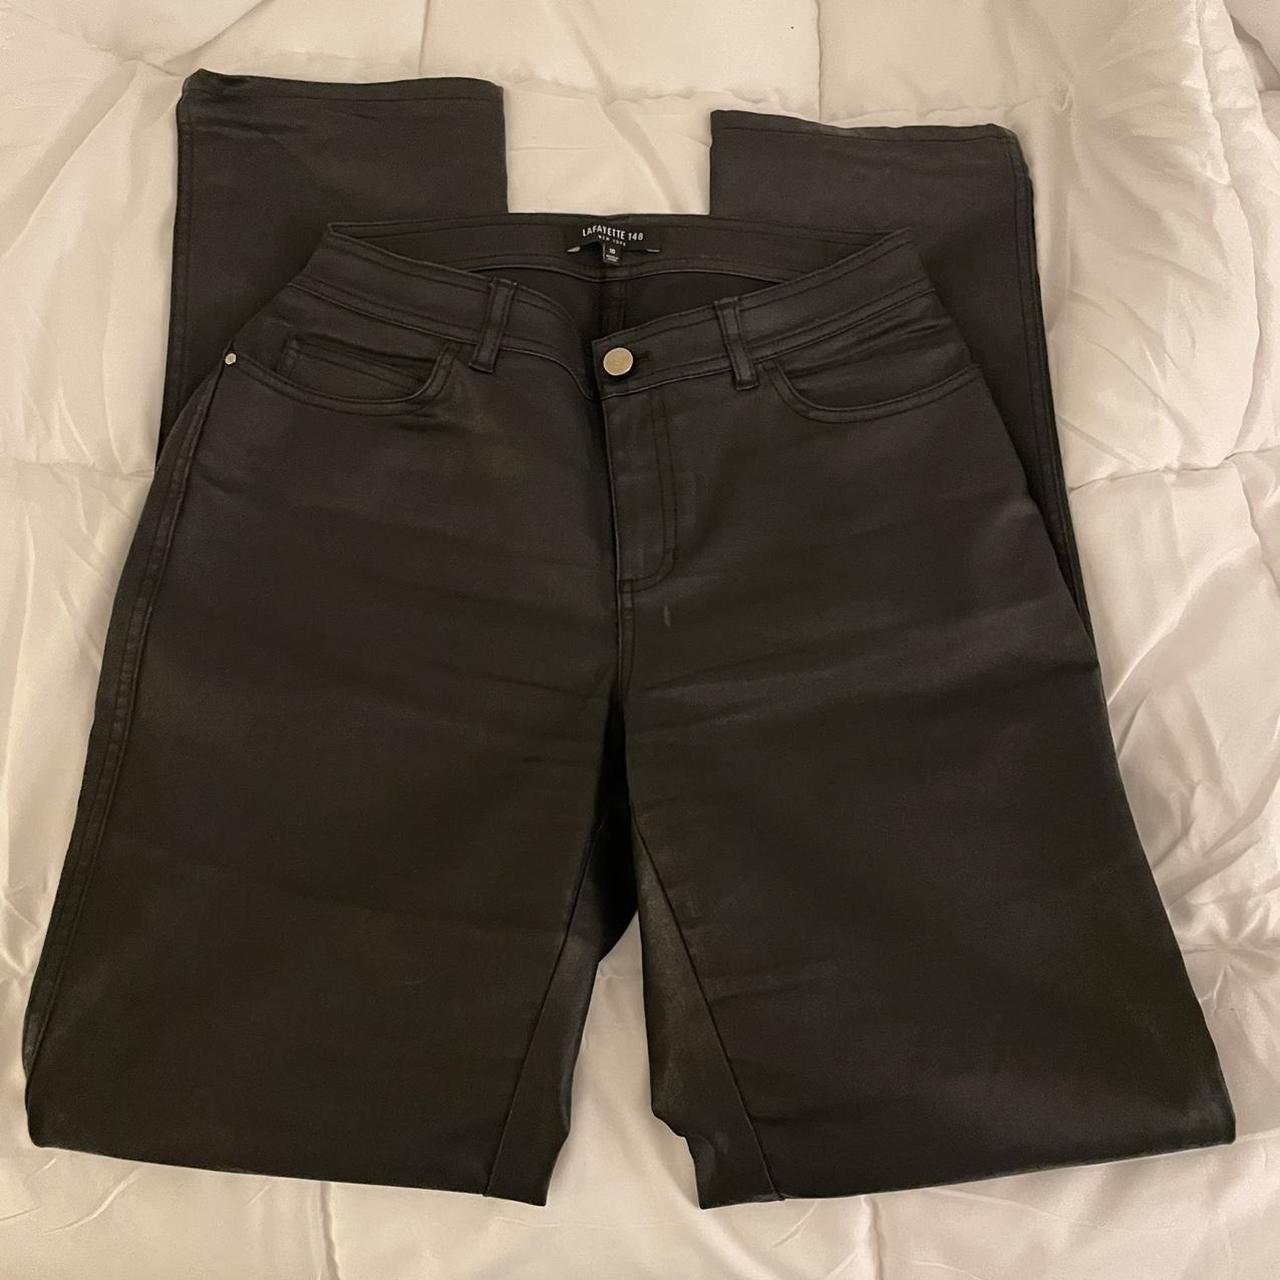 lafayette 148 waxed leather pants size 10, for... - Depop